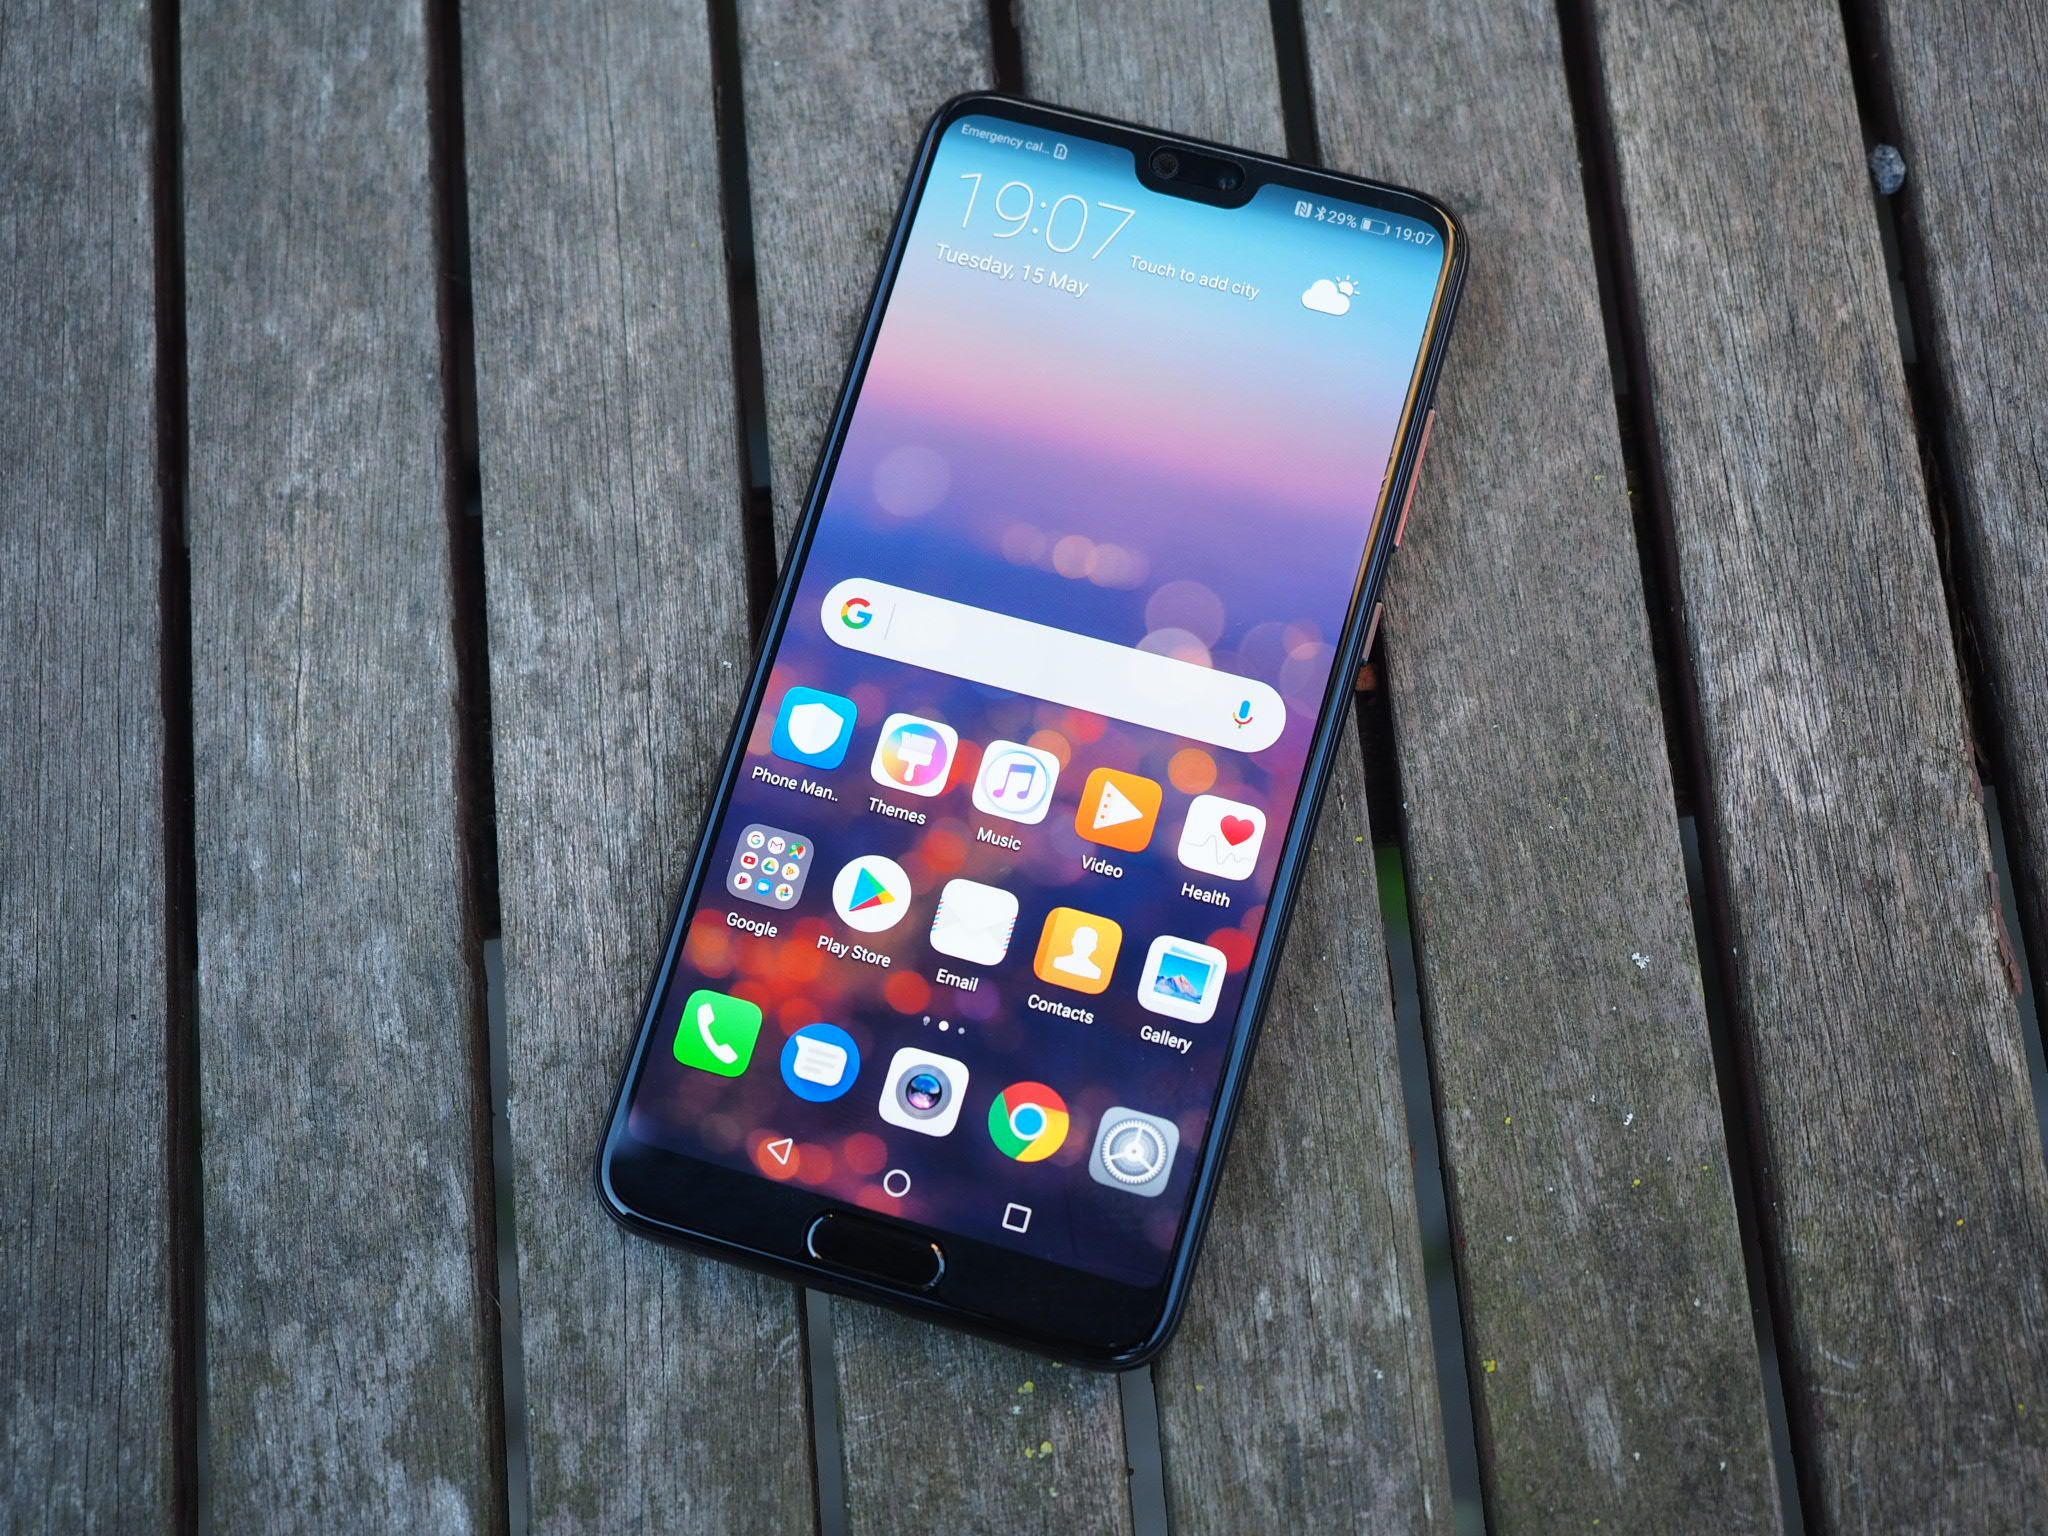 The New Huawei P20 is here – First Impressions